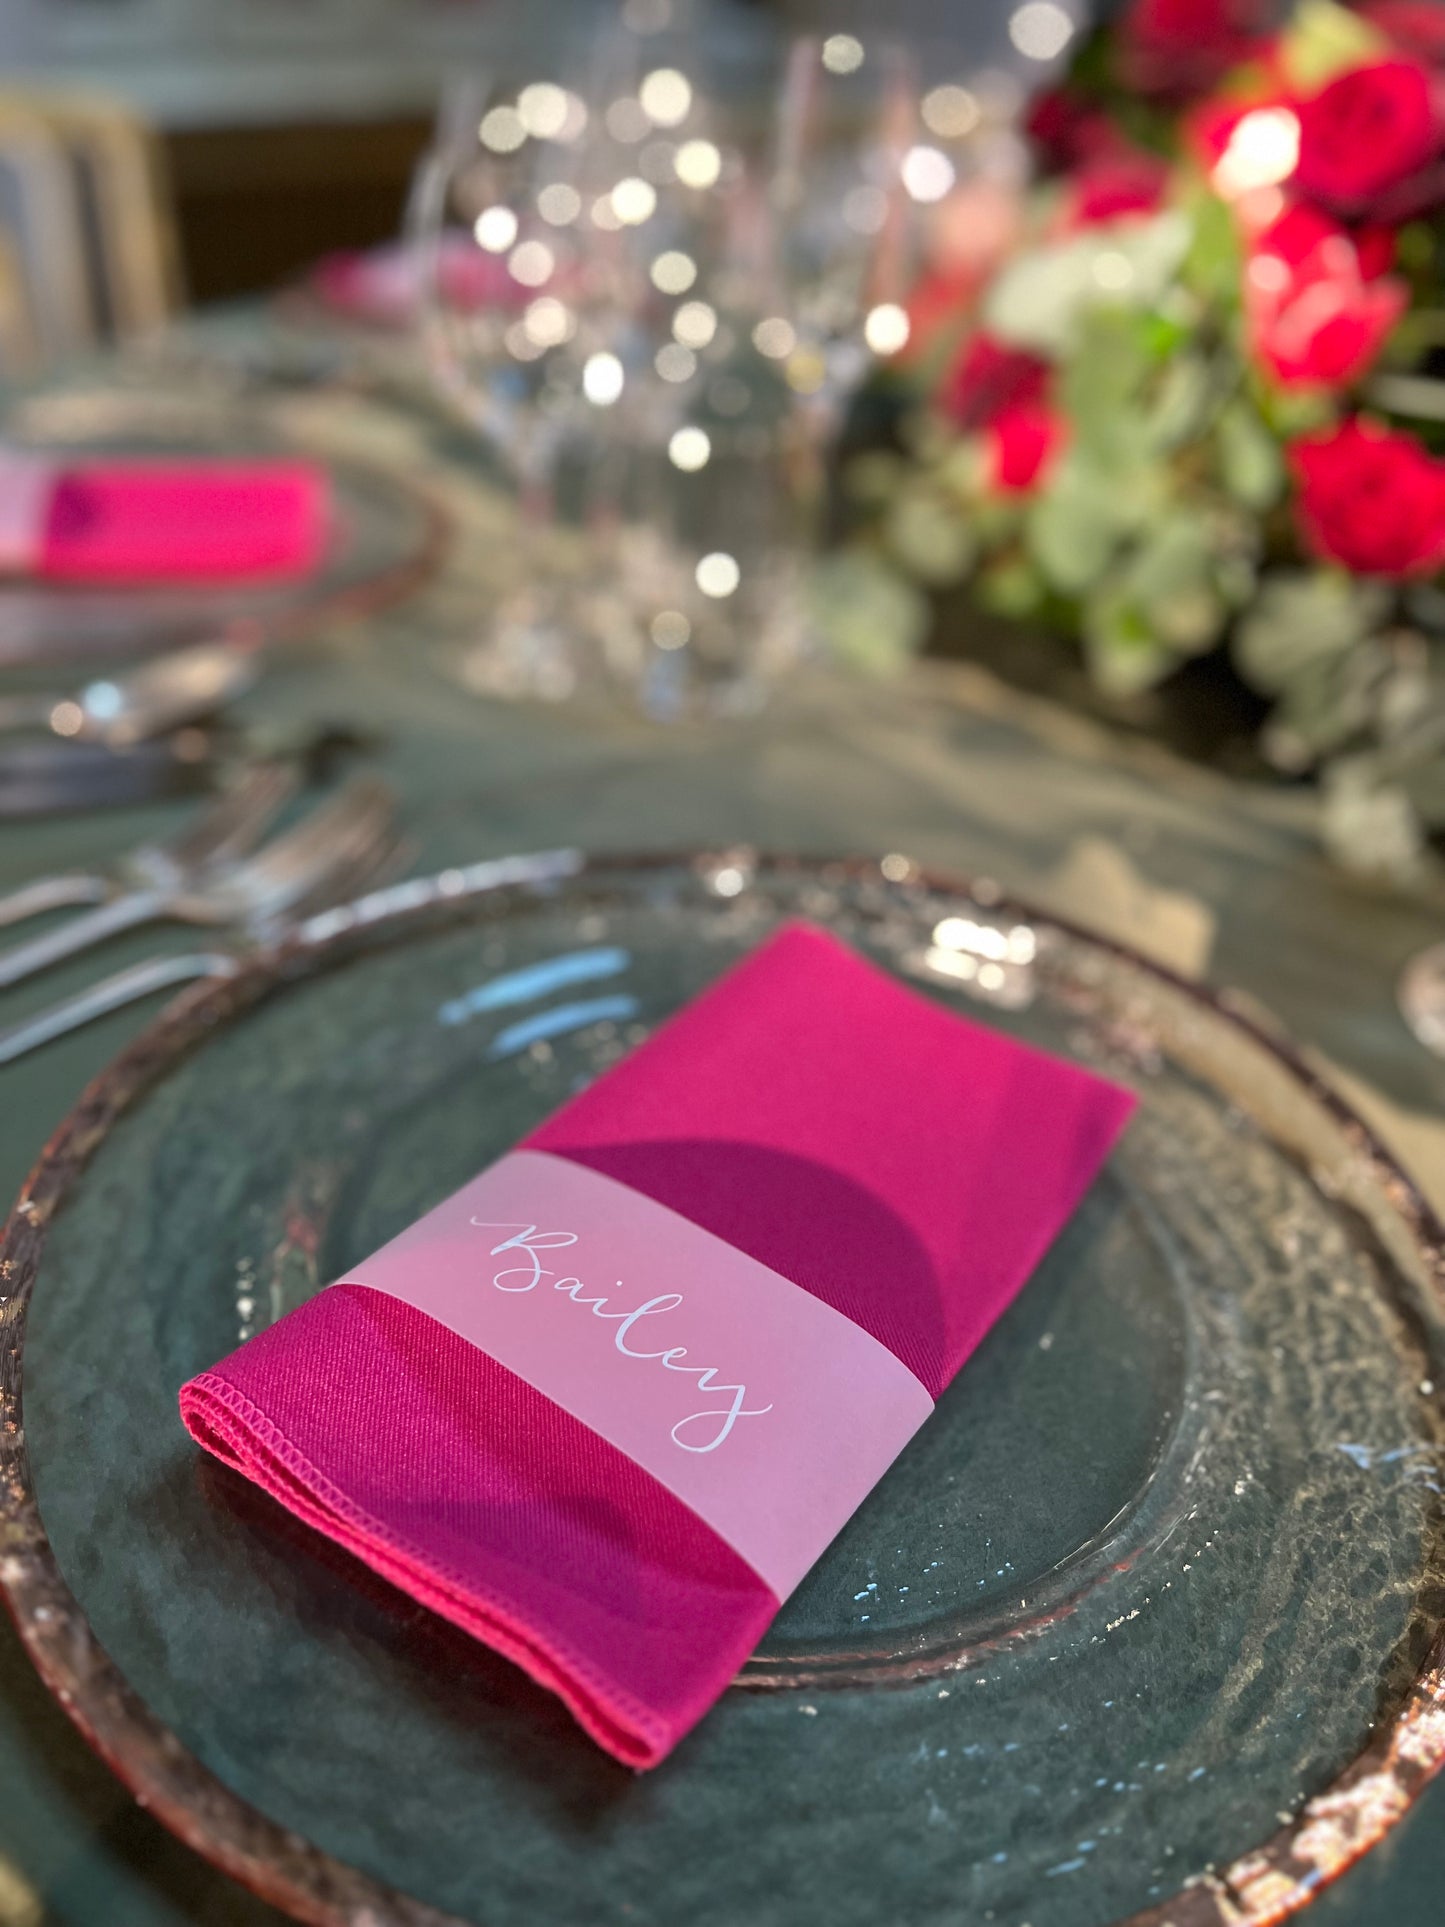 vellum band going around pink napkin sitting on rose gold charger plate. white ink calligraphy on vellum band with guest name 